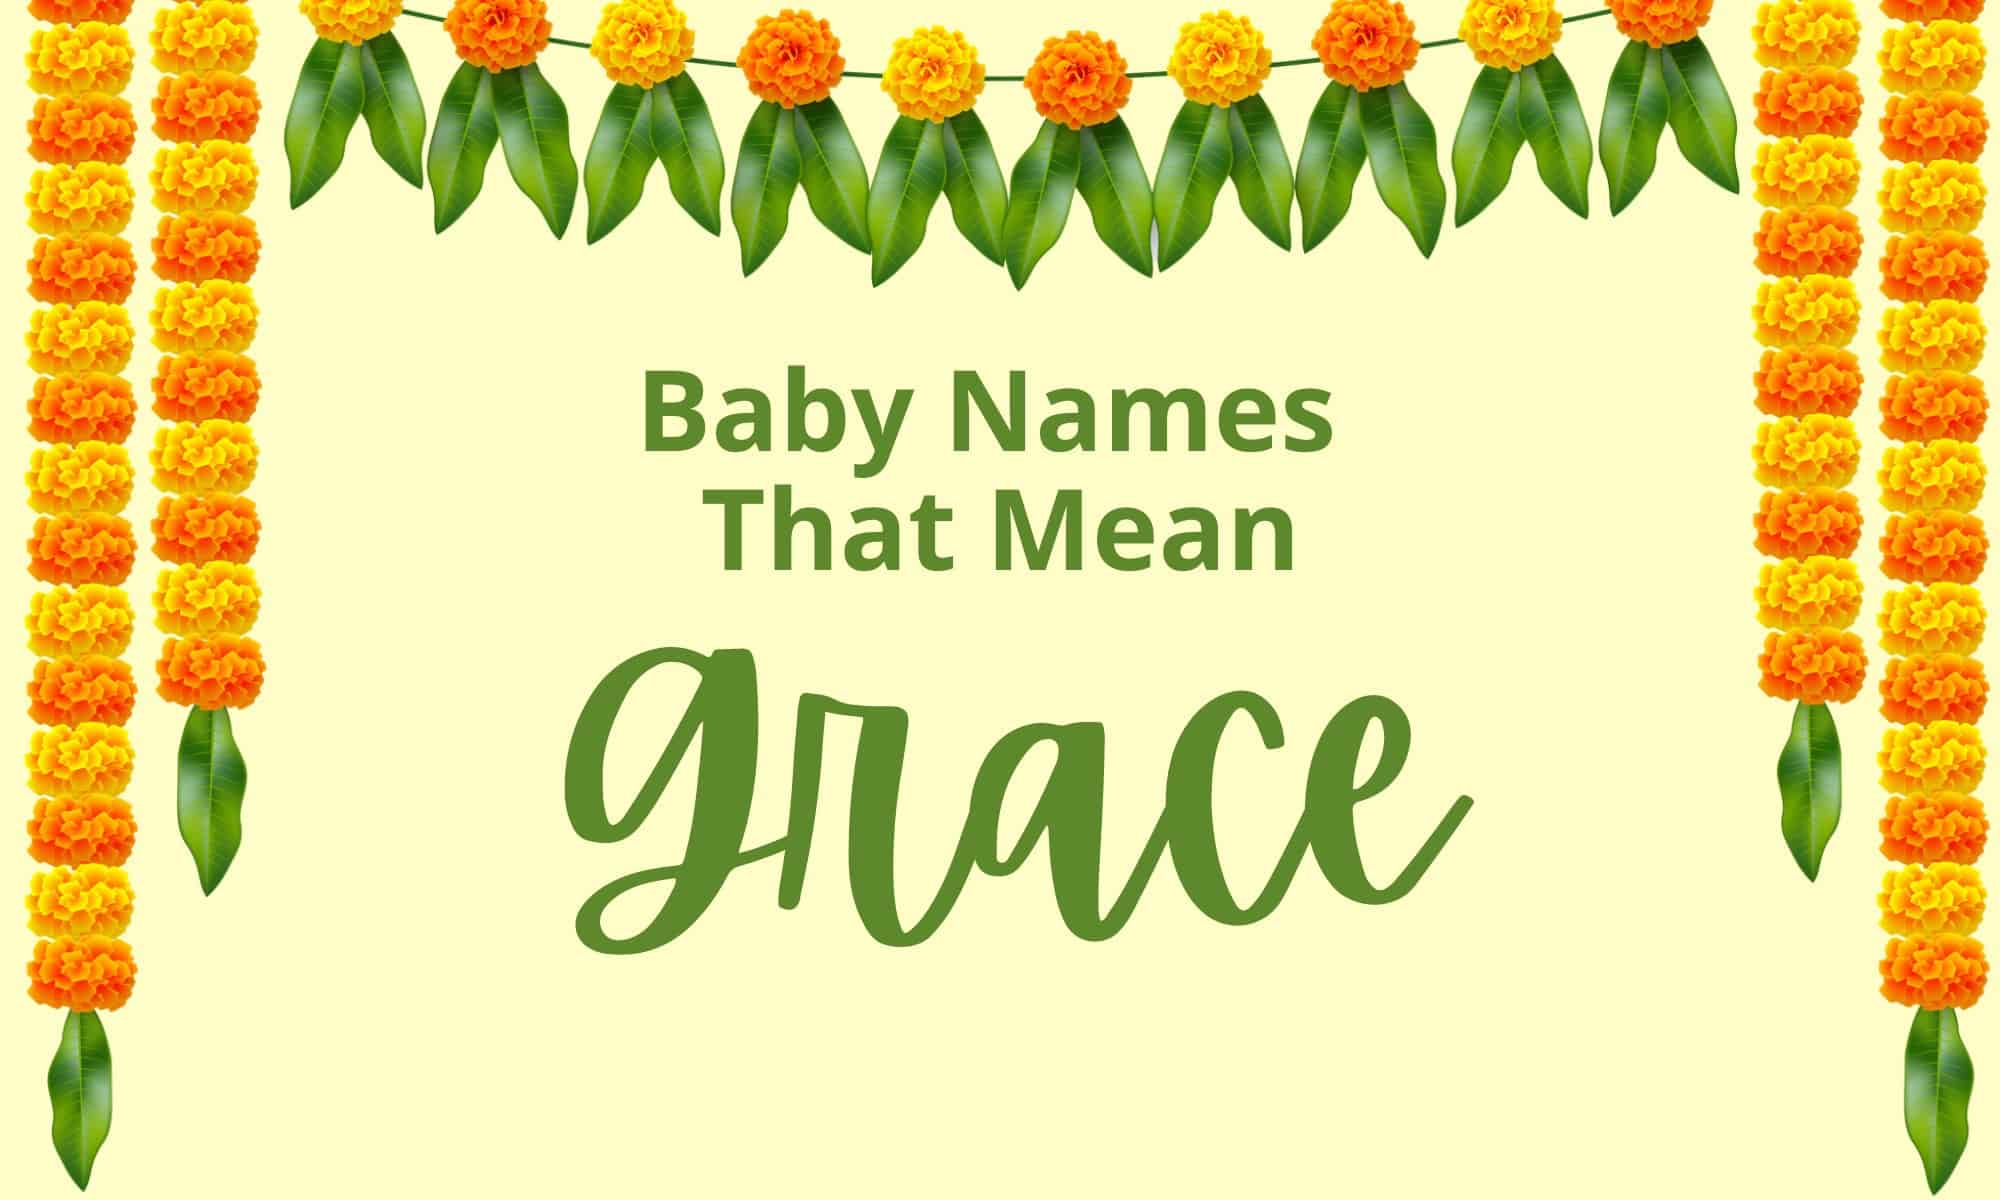 baby names that mean grace